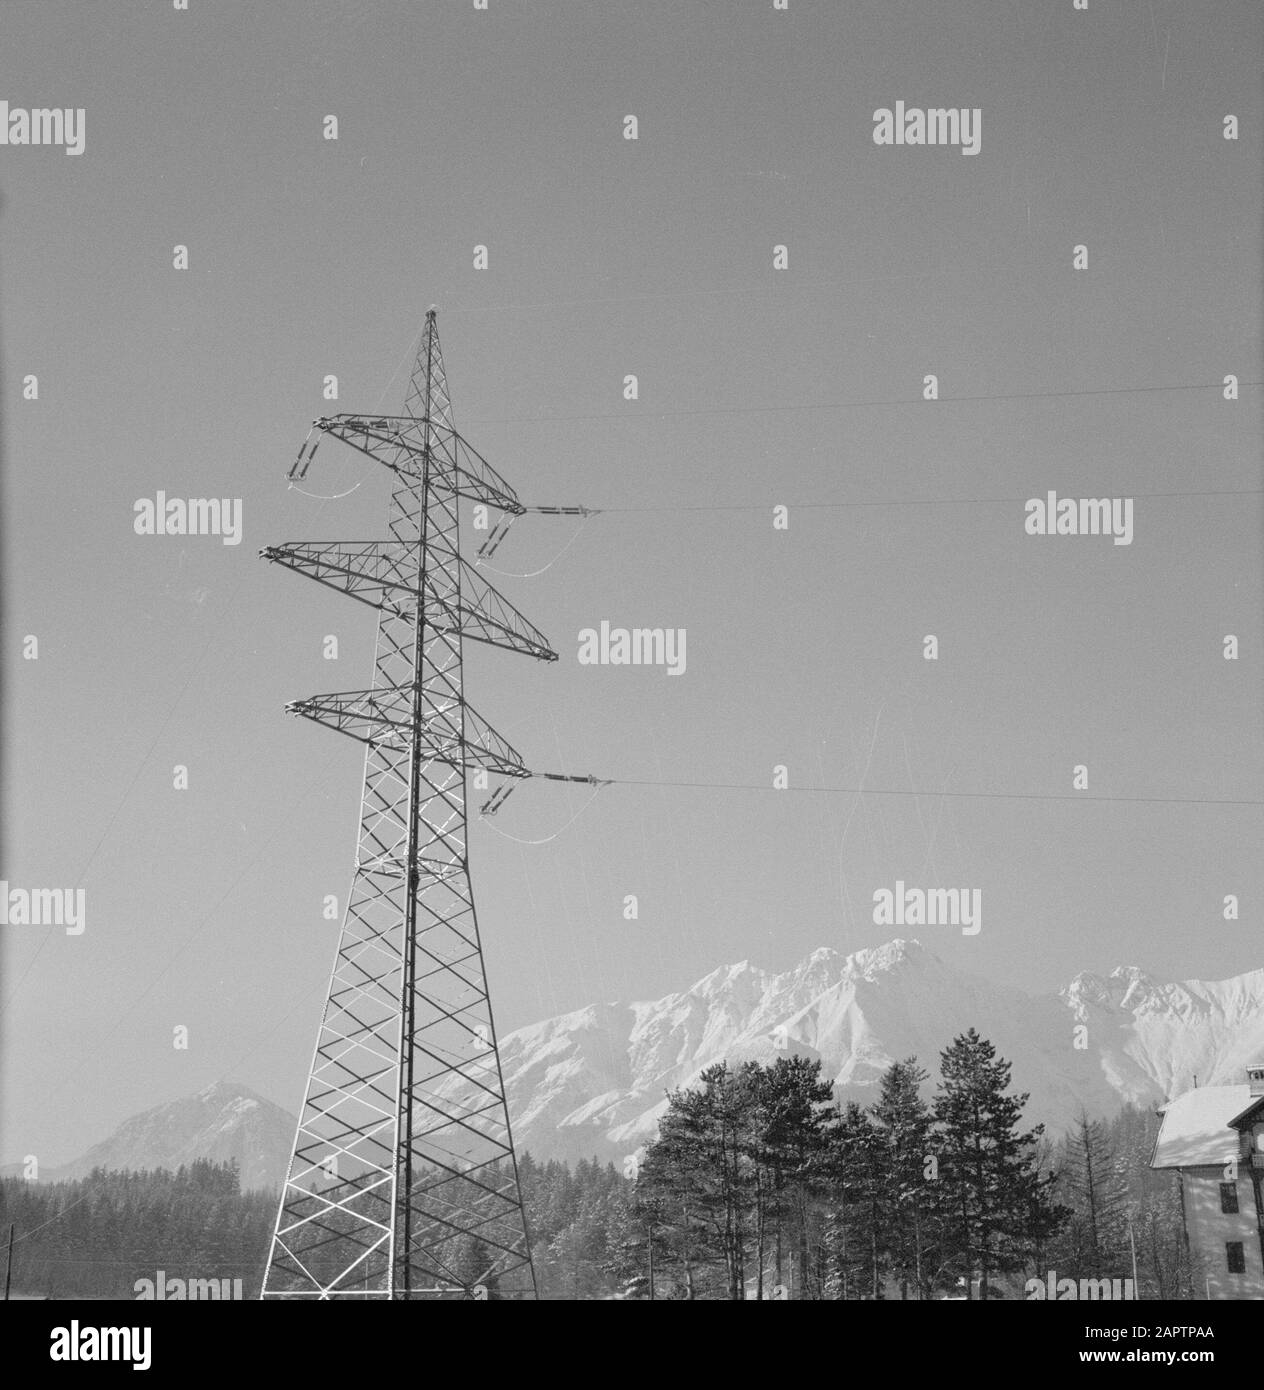 Winter in Tyrol  High voltage mast with the Karwendel Mountains in the background Date: January 1960 Location: Austria, Sistrans, Tyrol Keywords: mountains, electricity, high voltage masts, landscapes, snow, winter Stock Photo